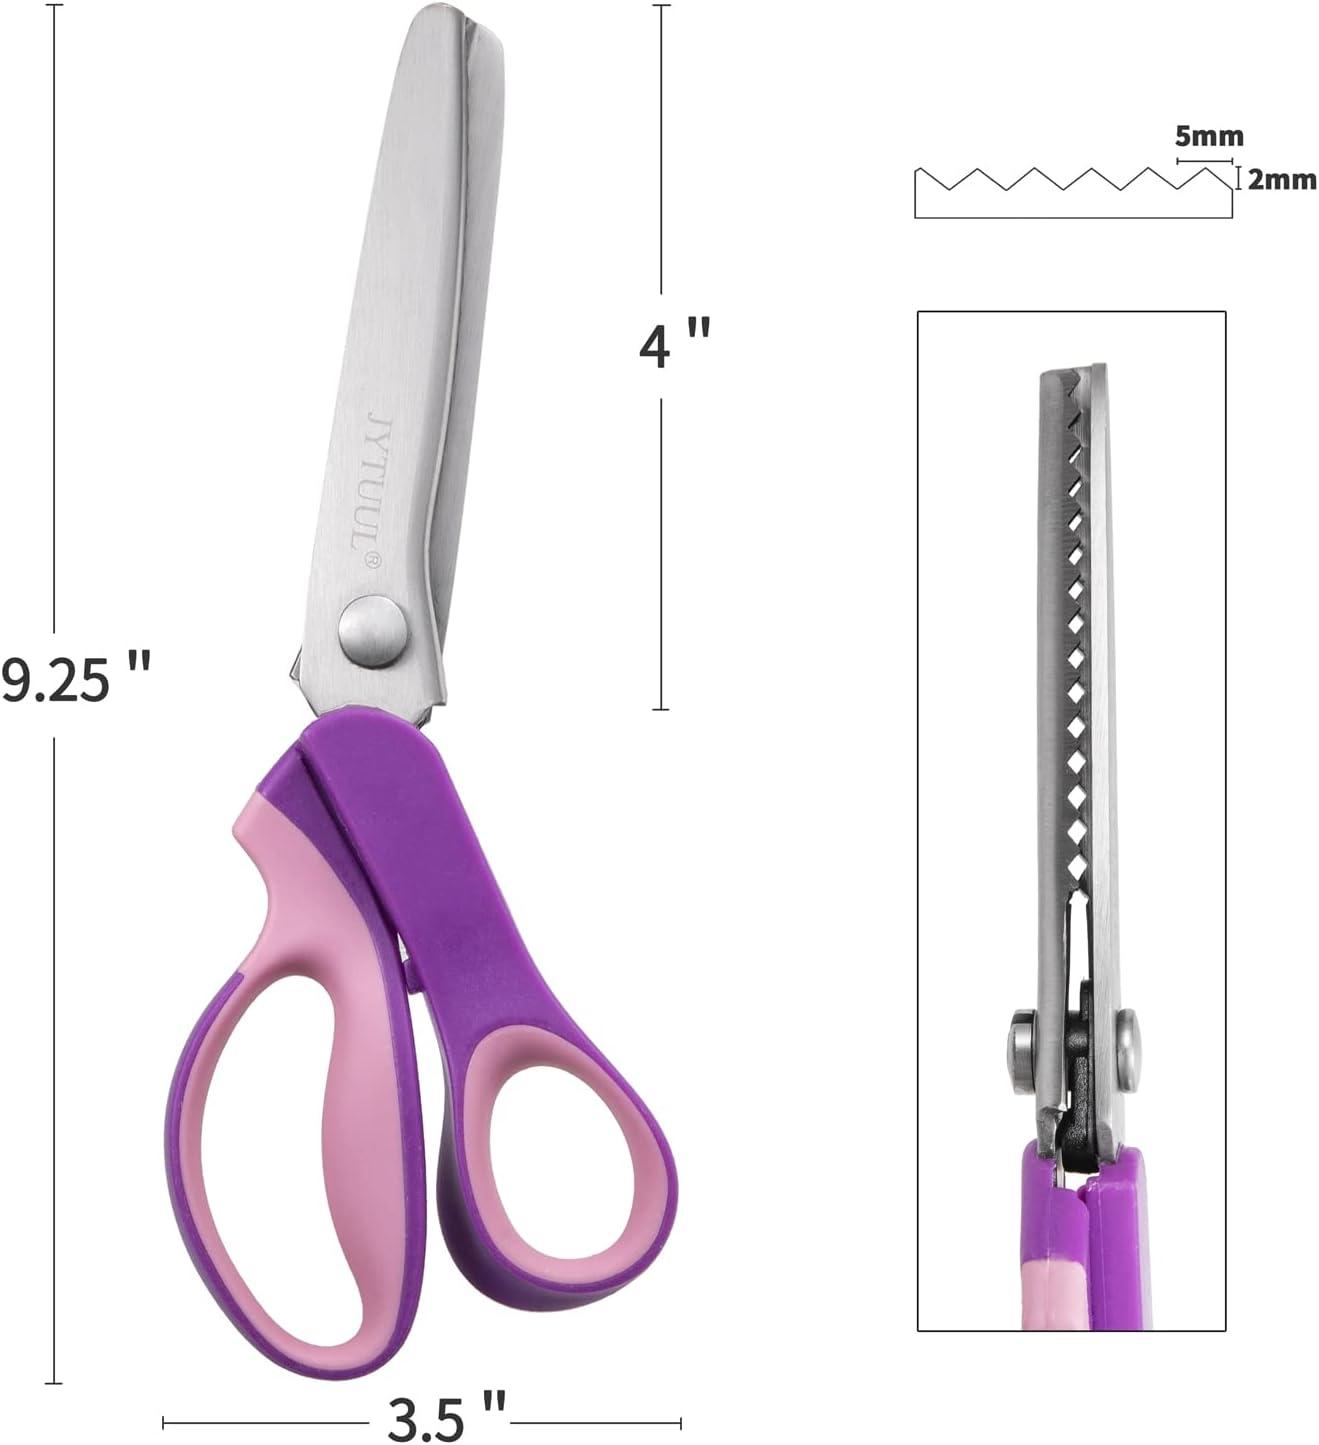 Pinking Shears Scissors for Fabric Paper Cutting, 9 Stainless Steel Zig  Zag Cut Scissors, Professional Strong Sharpe Sewing Dressmaking Scissors